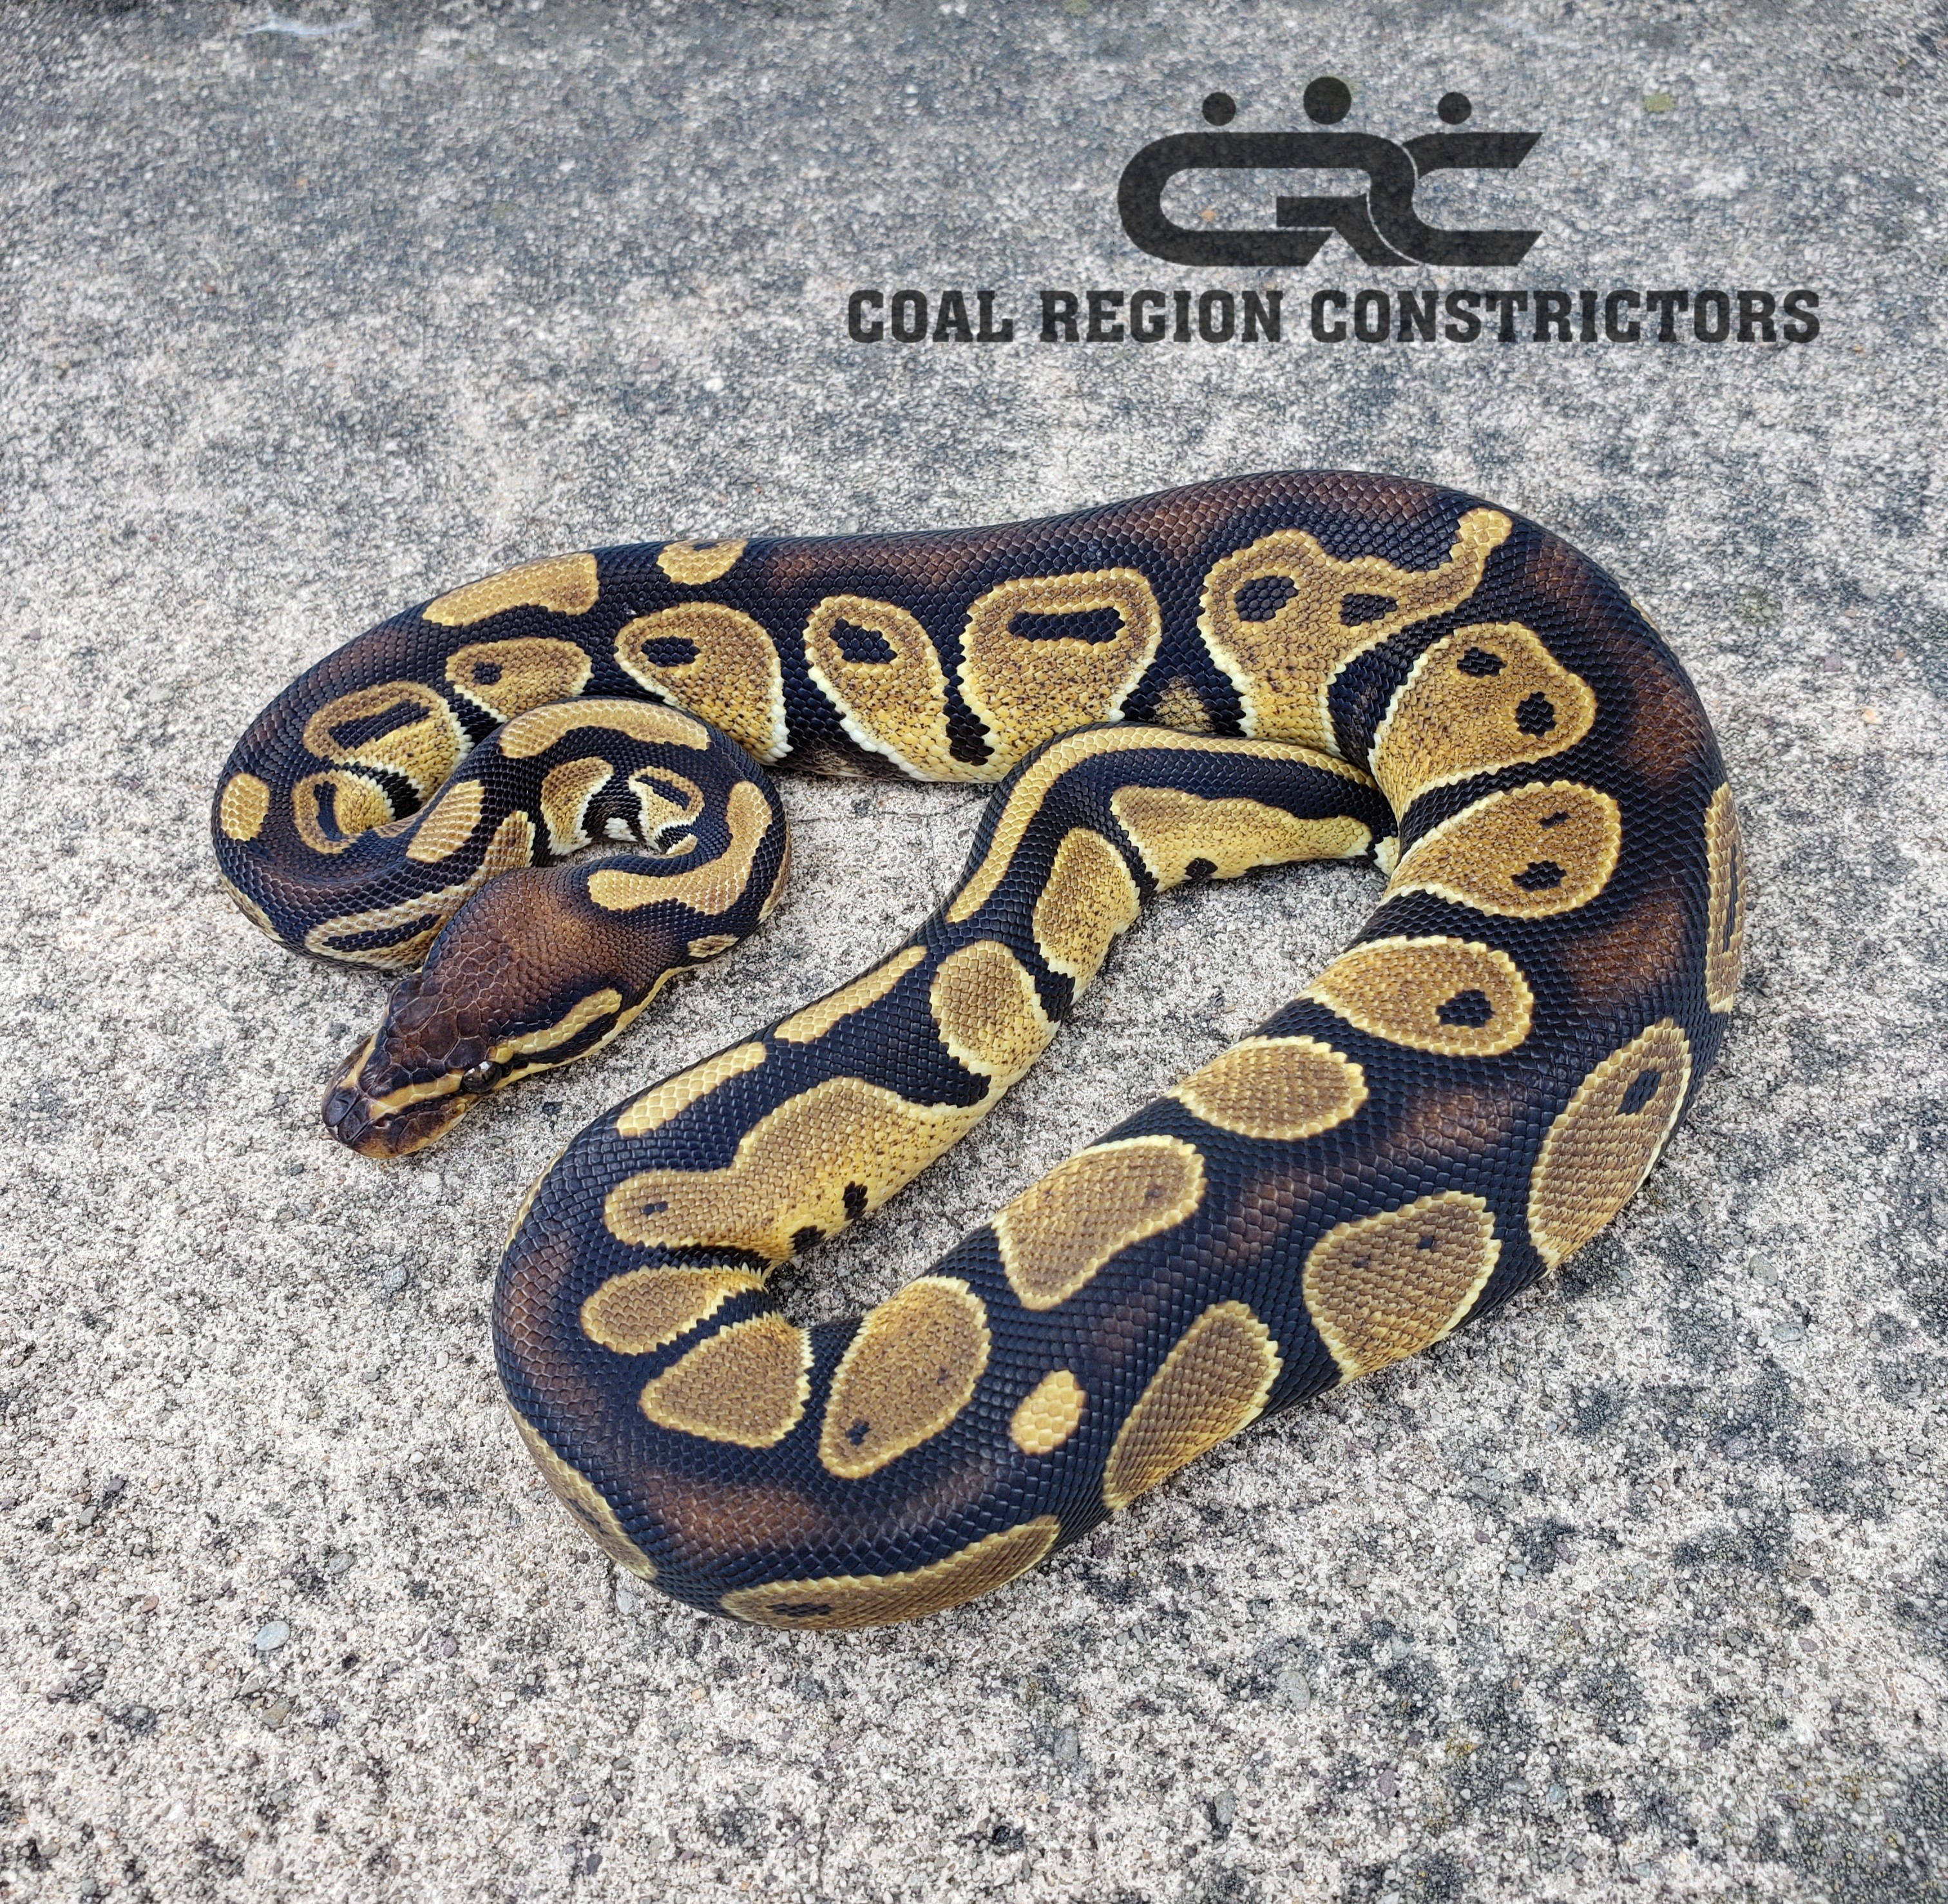 Genetic Black Back Ball Python by Coal Region Constrictors